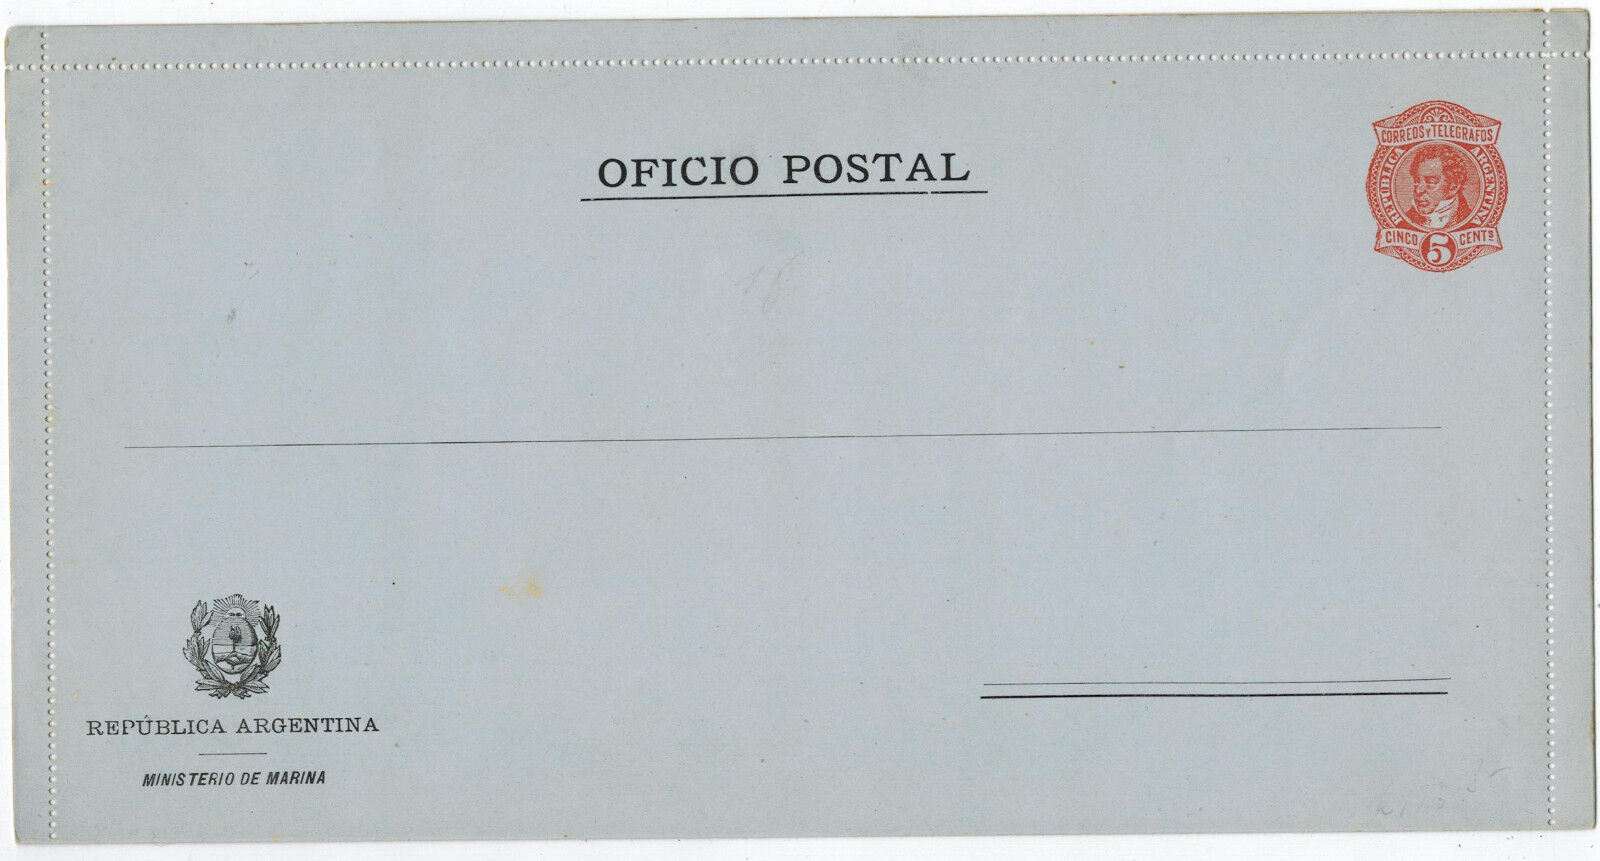 Unused Official Letter of Admiralty, Argentina 1900s